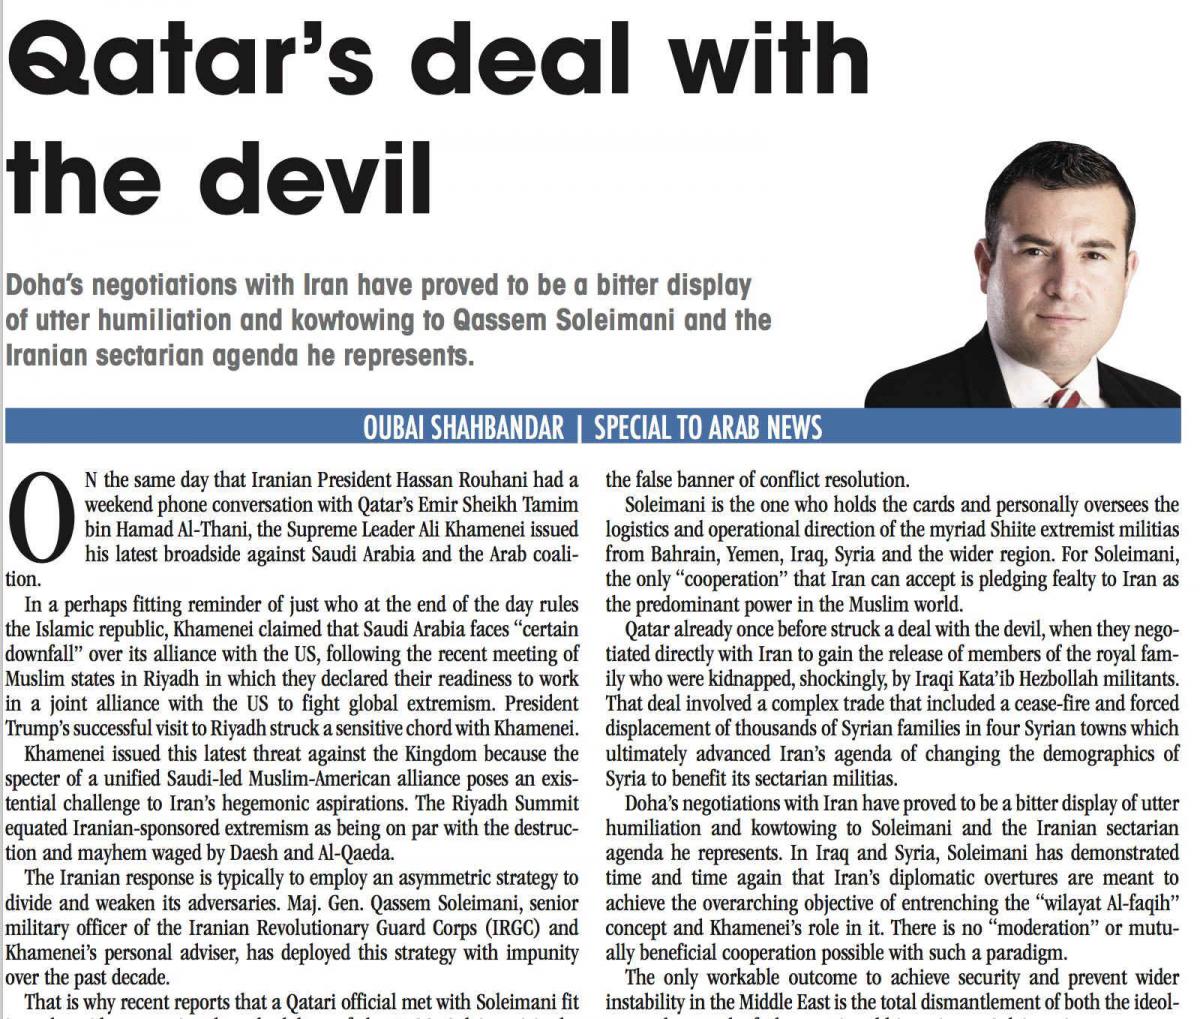 A view from the Saudi newspaper, Arab News